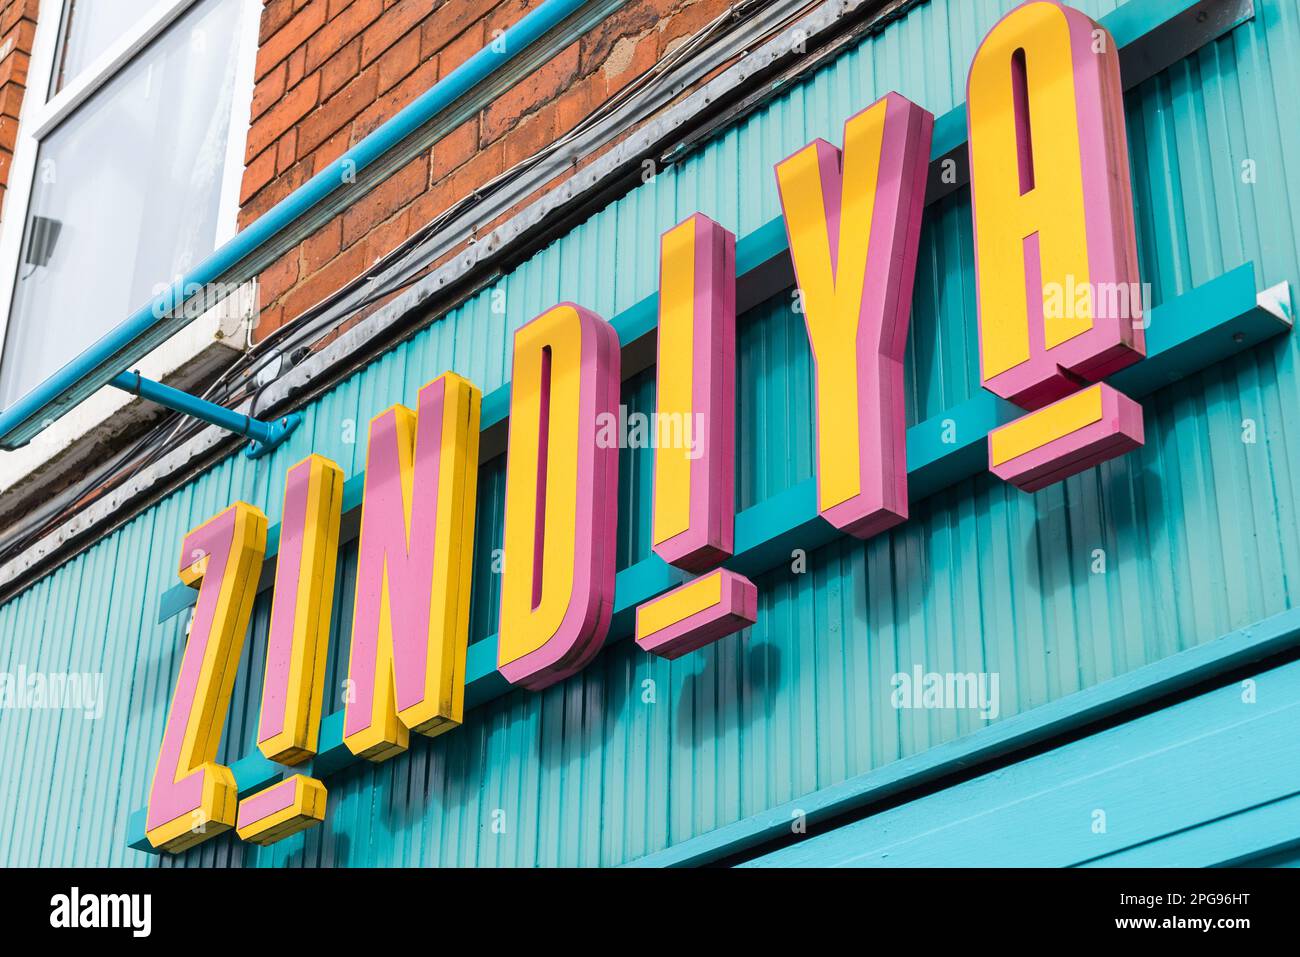 Zindiya indian restaurant serving grills and street food dishes in Moseley, Birmingham Stock Photo